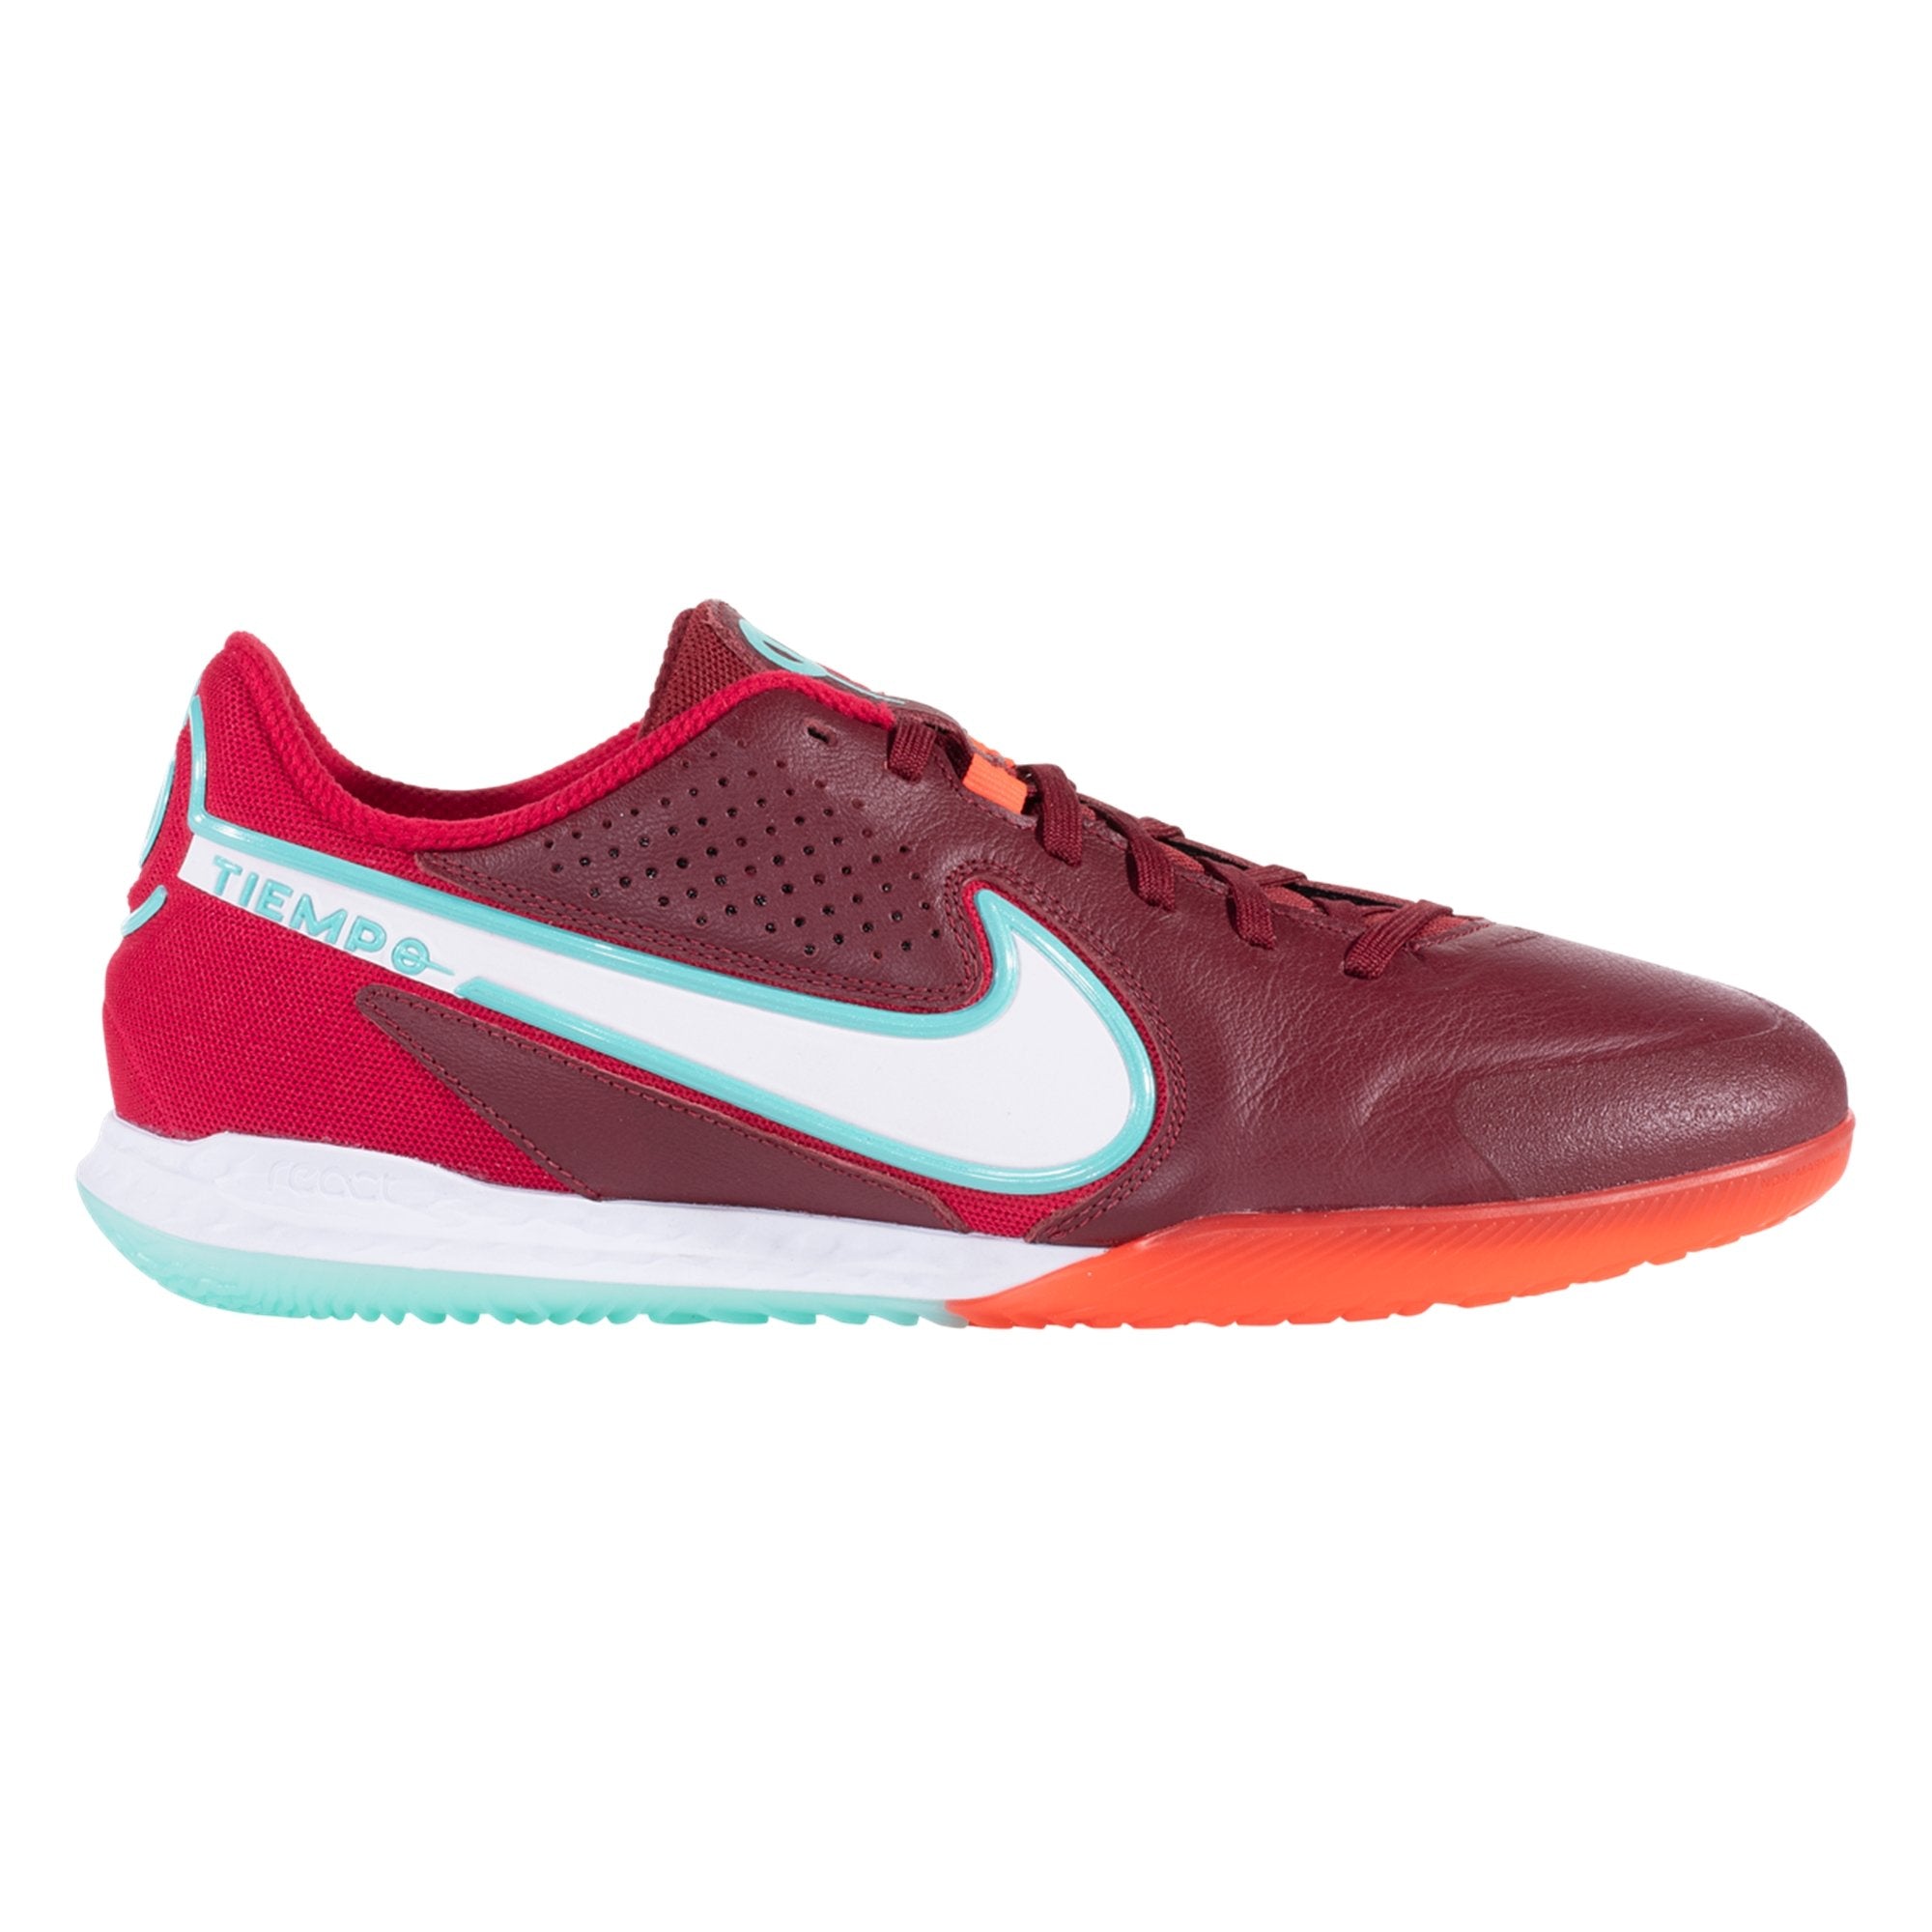 Nike Tiempo Legend 9 Academy IC Indoor Soccer Shoe - Team Red/White/Mystic Crimson/Dynamic Turquoise DA1190-616 – Soccer Zone USA